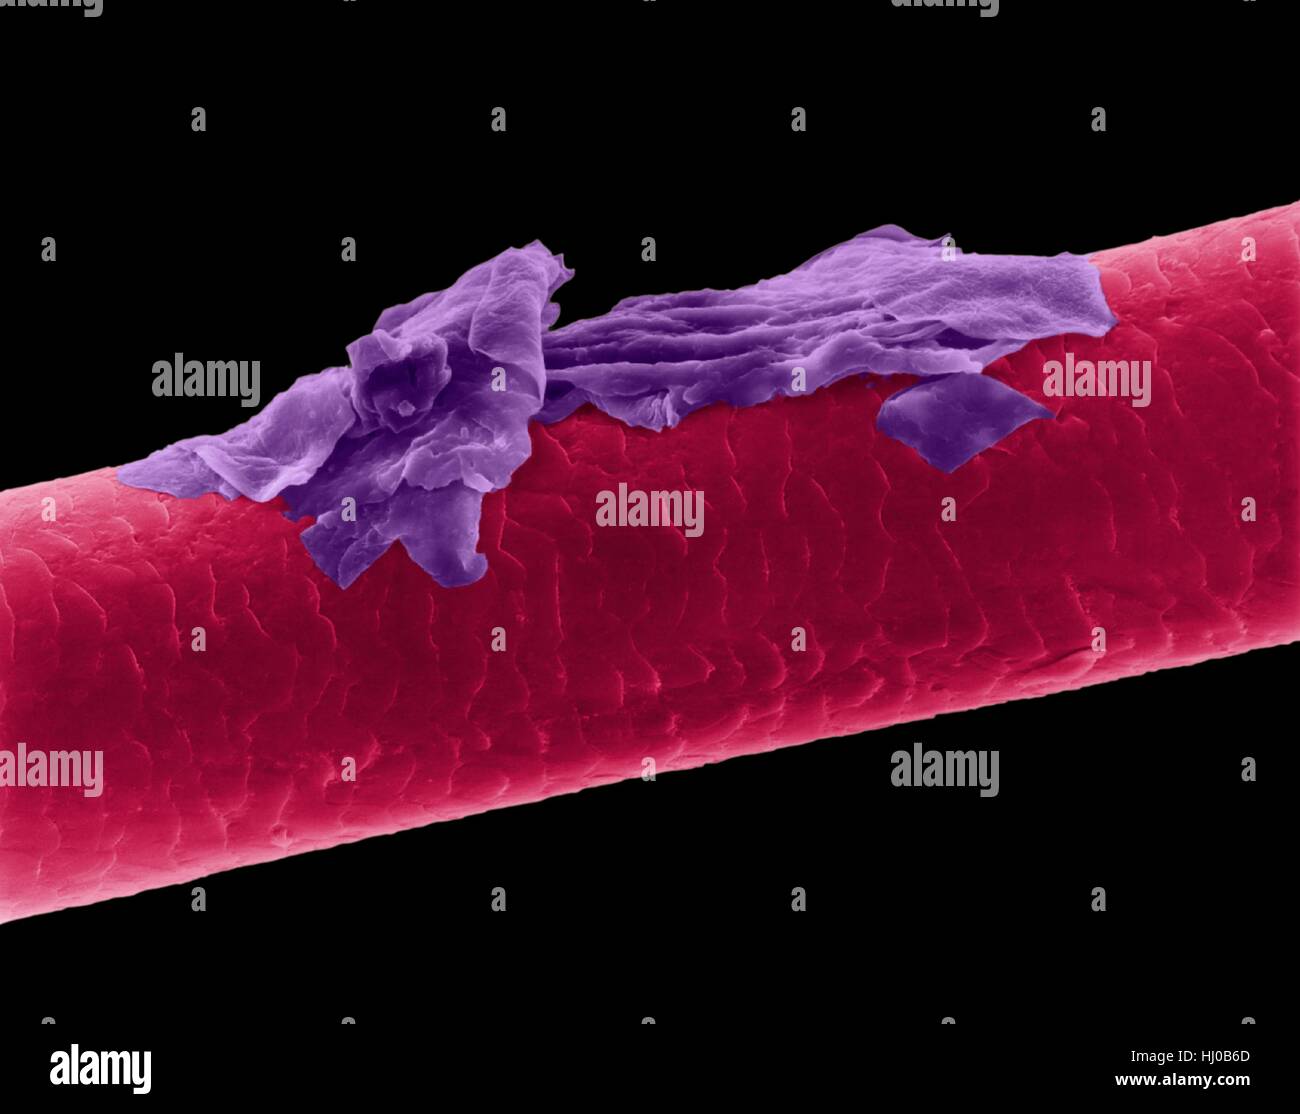 Human hair dandruff,coloured scanning electron micrograph (SEM).The outer layer of hair (the cuticle) has overlapping scales of keratin.These scales are thought to prevent hairs from matting together.Hair is made up of fibrous protein called keratin.Internally hair shaft is divided into three concentric sheaths (layers) called medulla,cortex outer cuticle.Hair is non-living tissue.Hair grows from hair root (bulb) embedded in skin.Hair growth occurs when epidermal cells divide at base of root bulb.Hair is non-living tissue.Magnification: x115 when shortest axis printed at 25 millimetres. Stock Photo